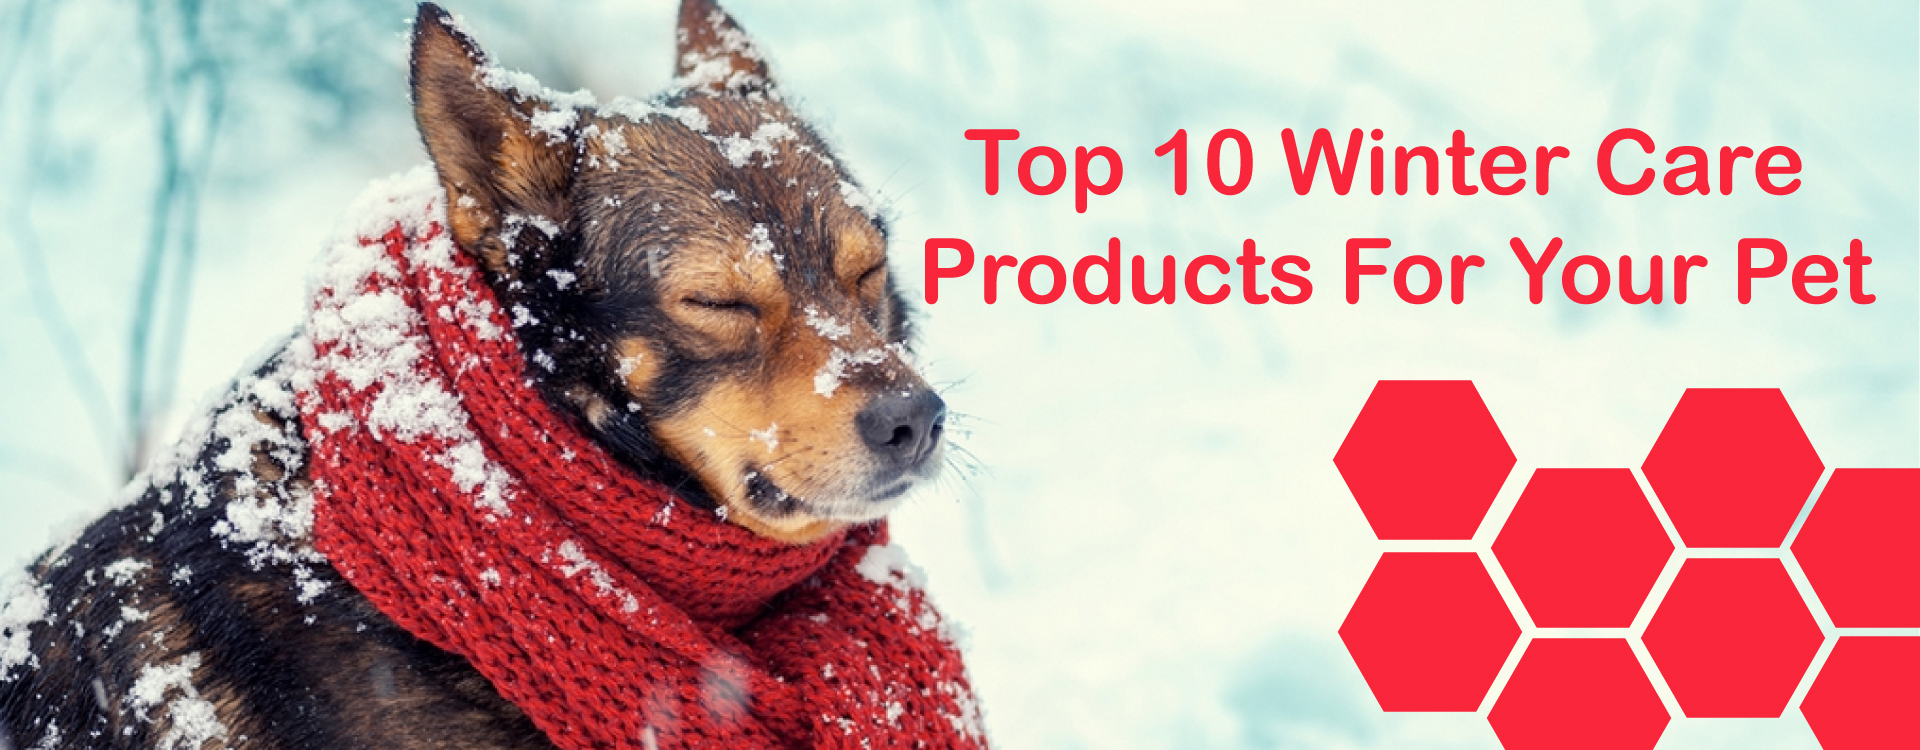 Top-10-Winter-Care-Products-For-Your-Pet